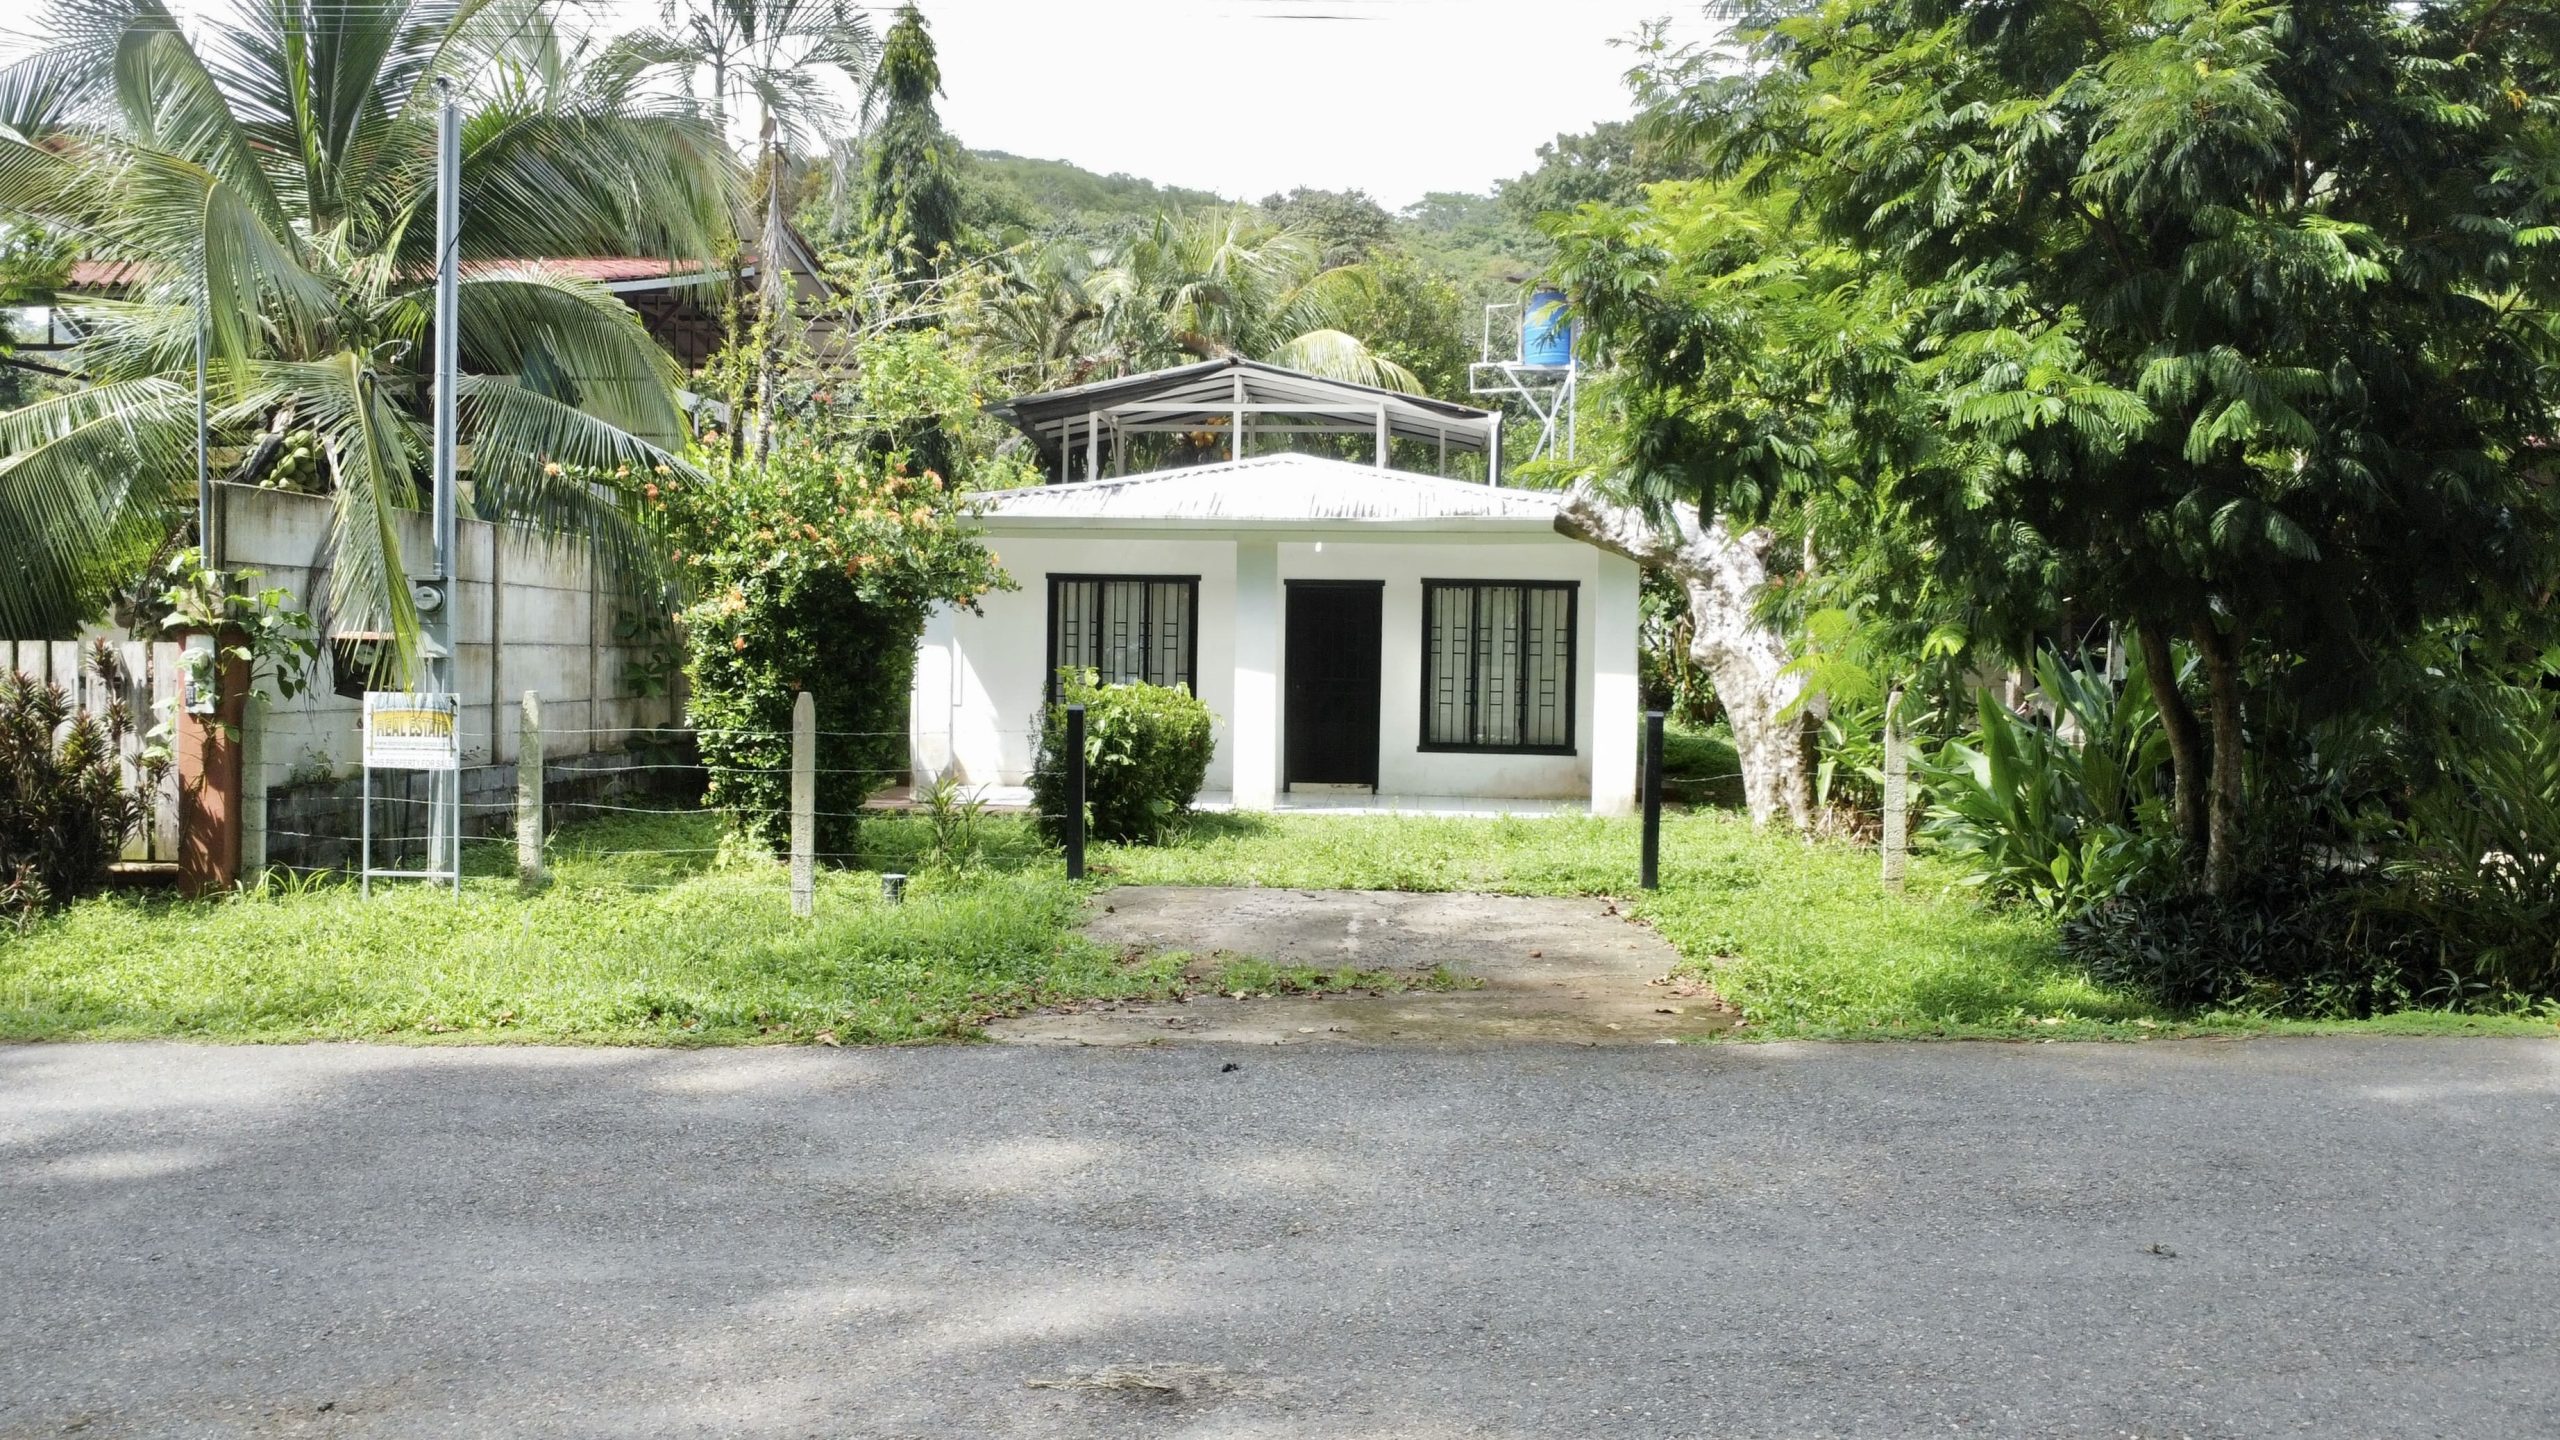 0.07 ACRES – 2 Bedroom Home On Main St In Hatillo